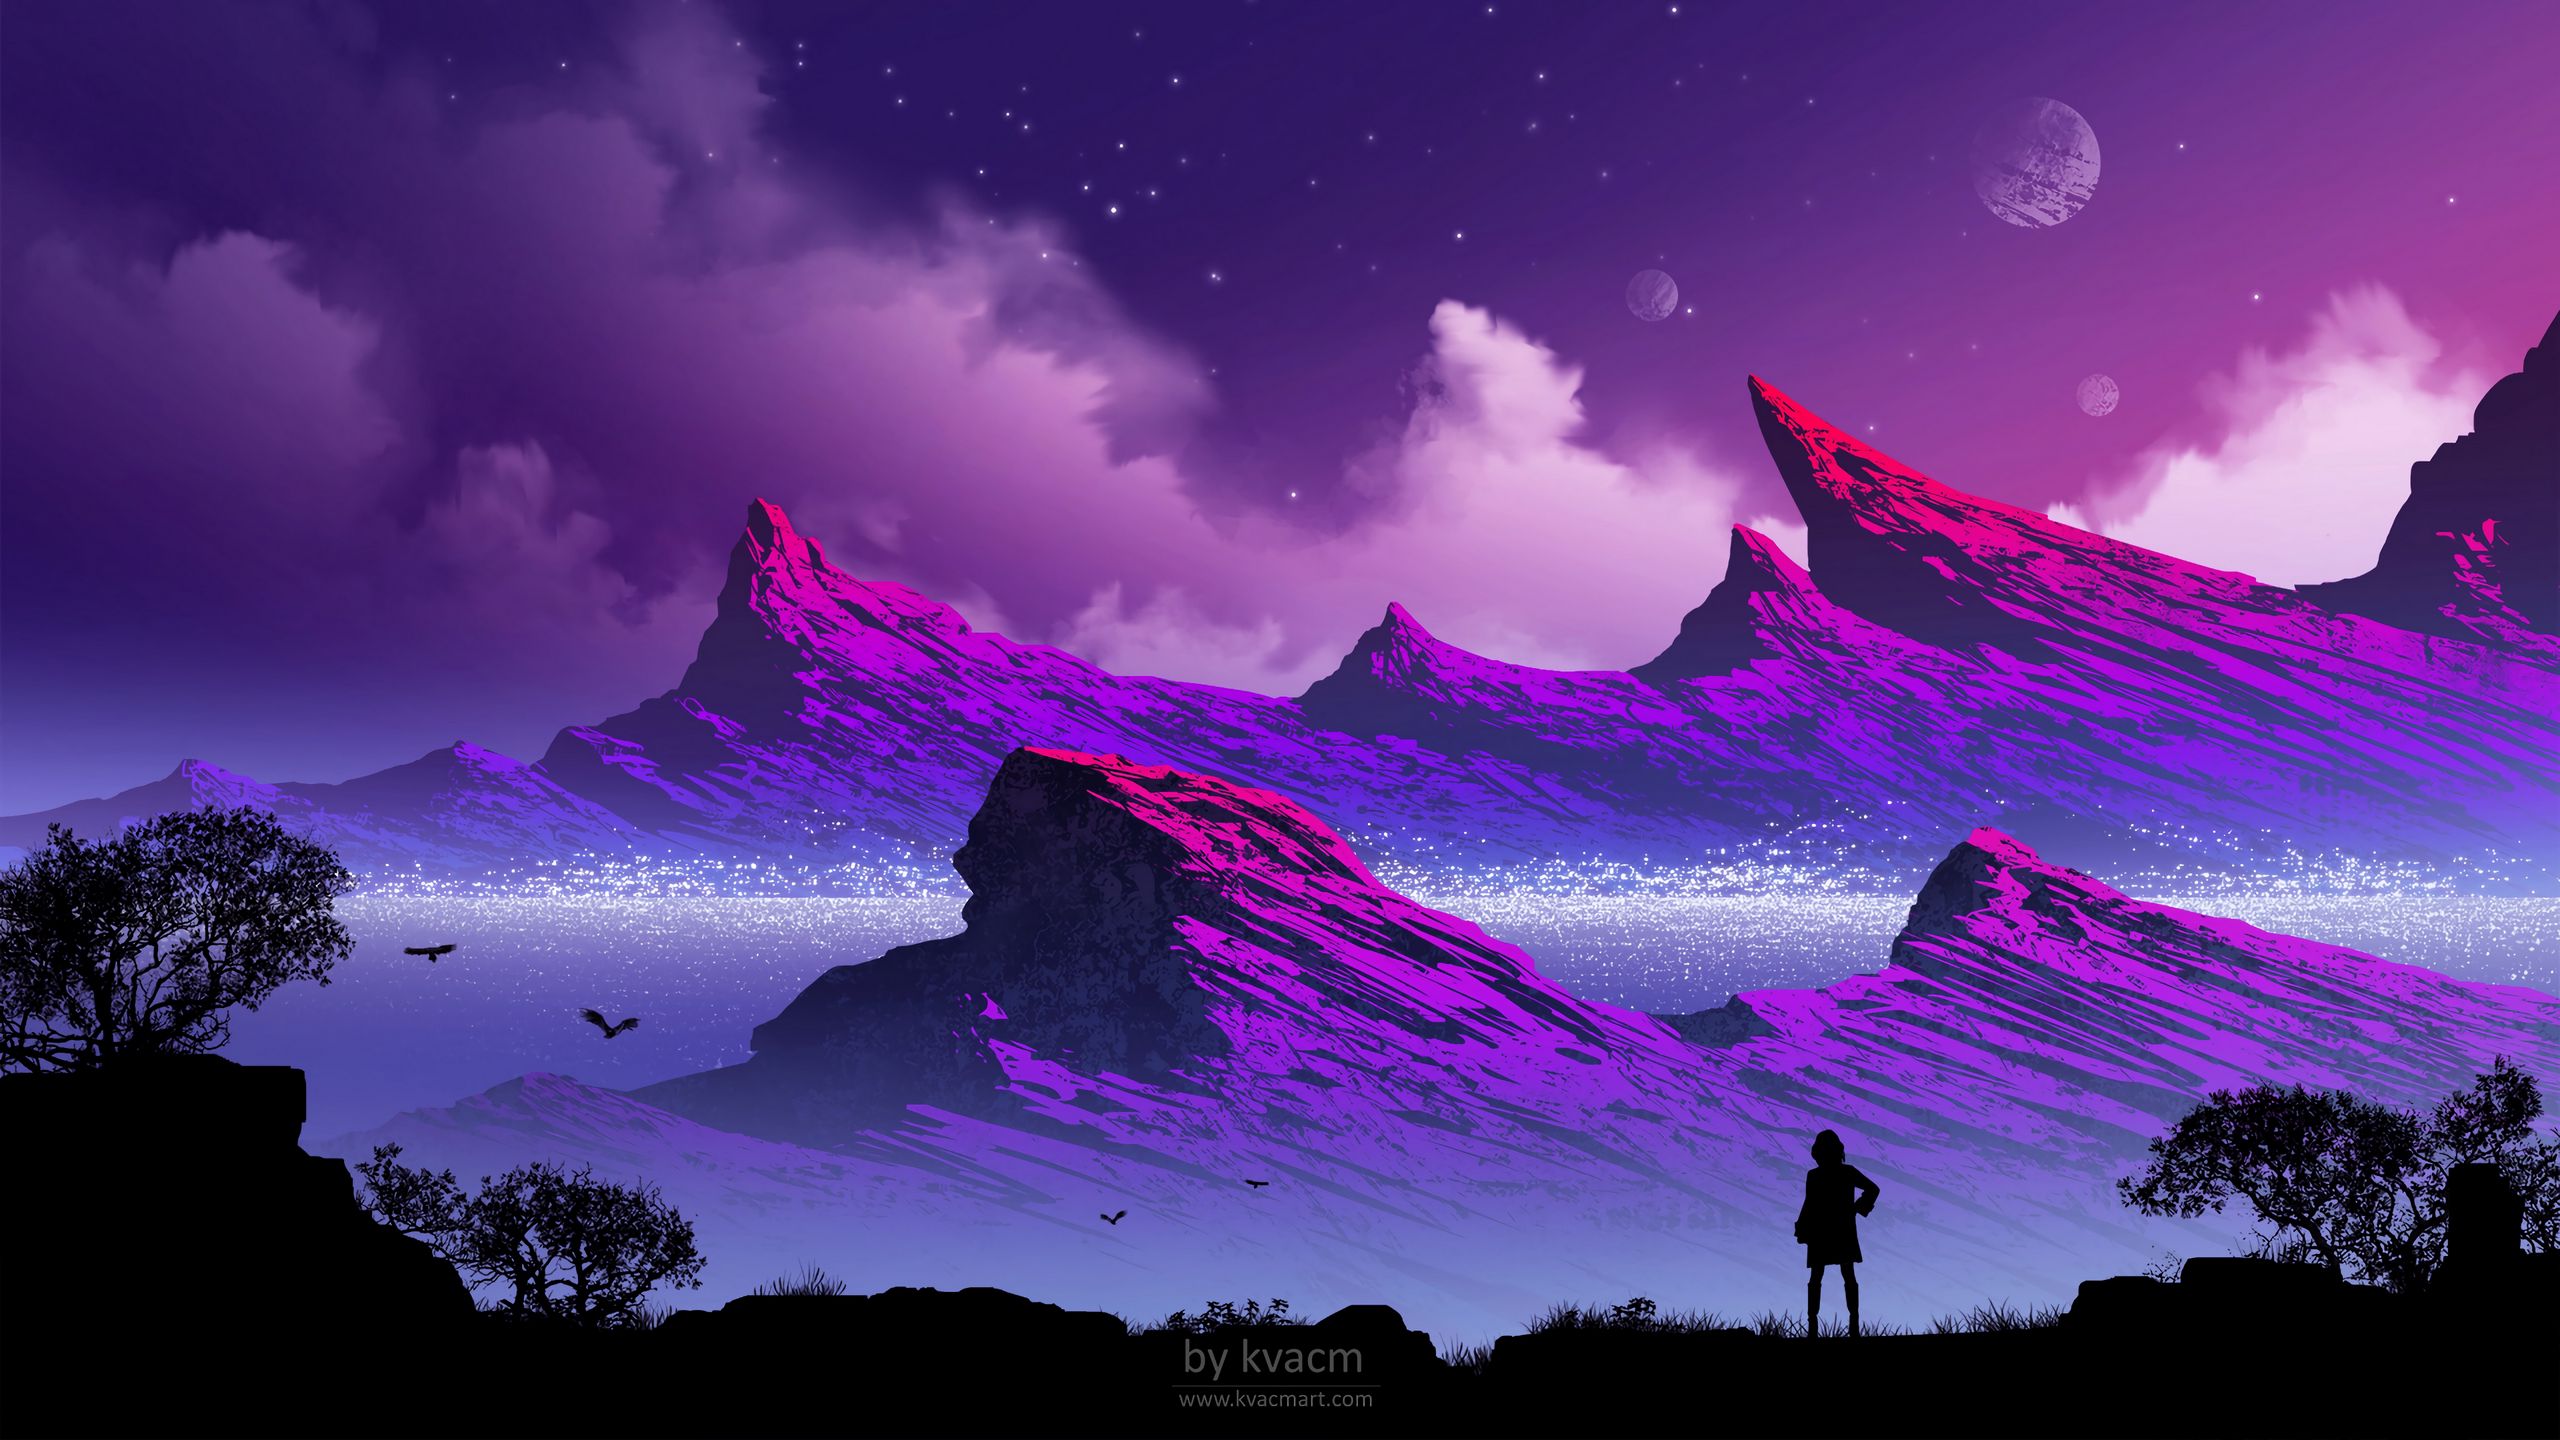 Download wallpaper 2560x1440 silhouette, mountains, clouds, art, fog,  loneliness, lonely widescreen 16:9 hd background